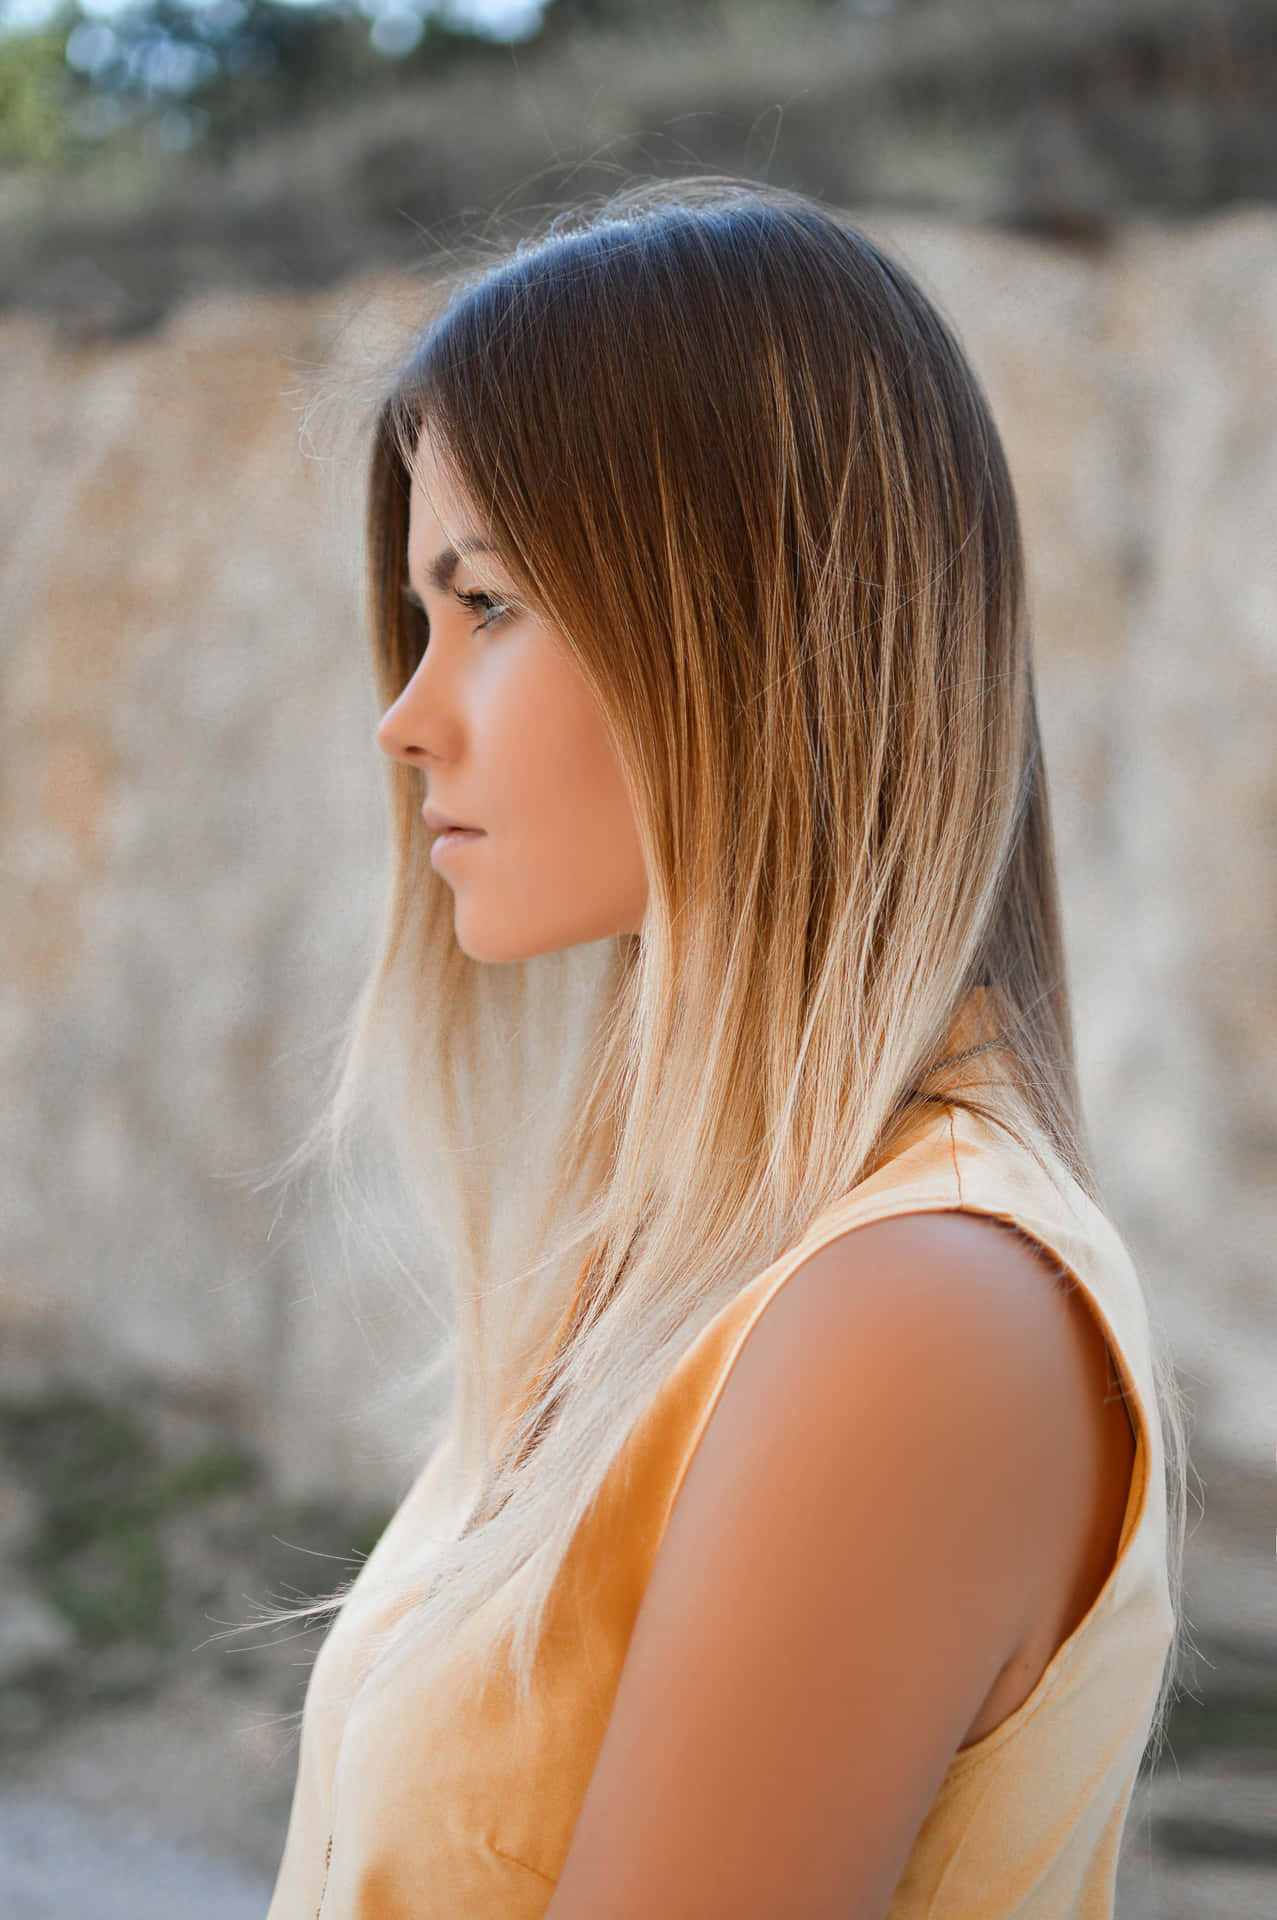 Enigmatic Beauty: Side Profile of a Woman with Ombre Hair Wallpaper